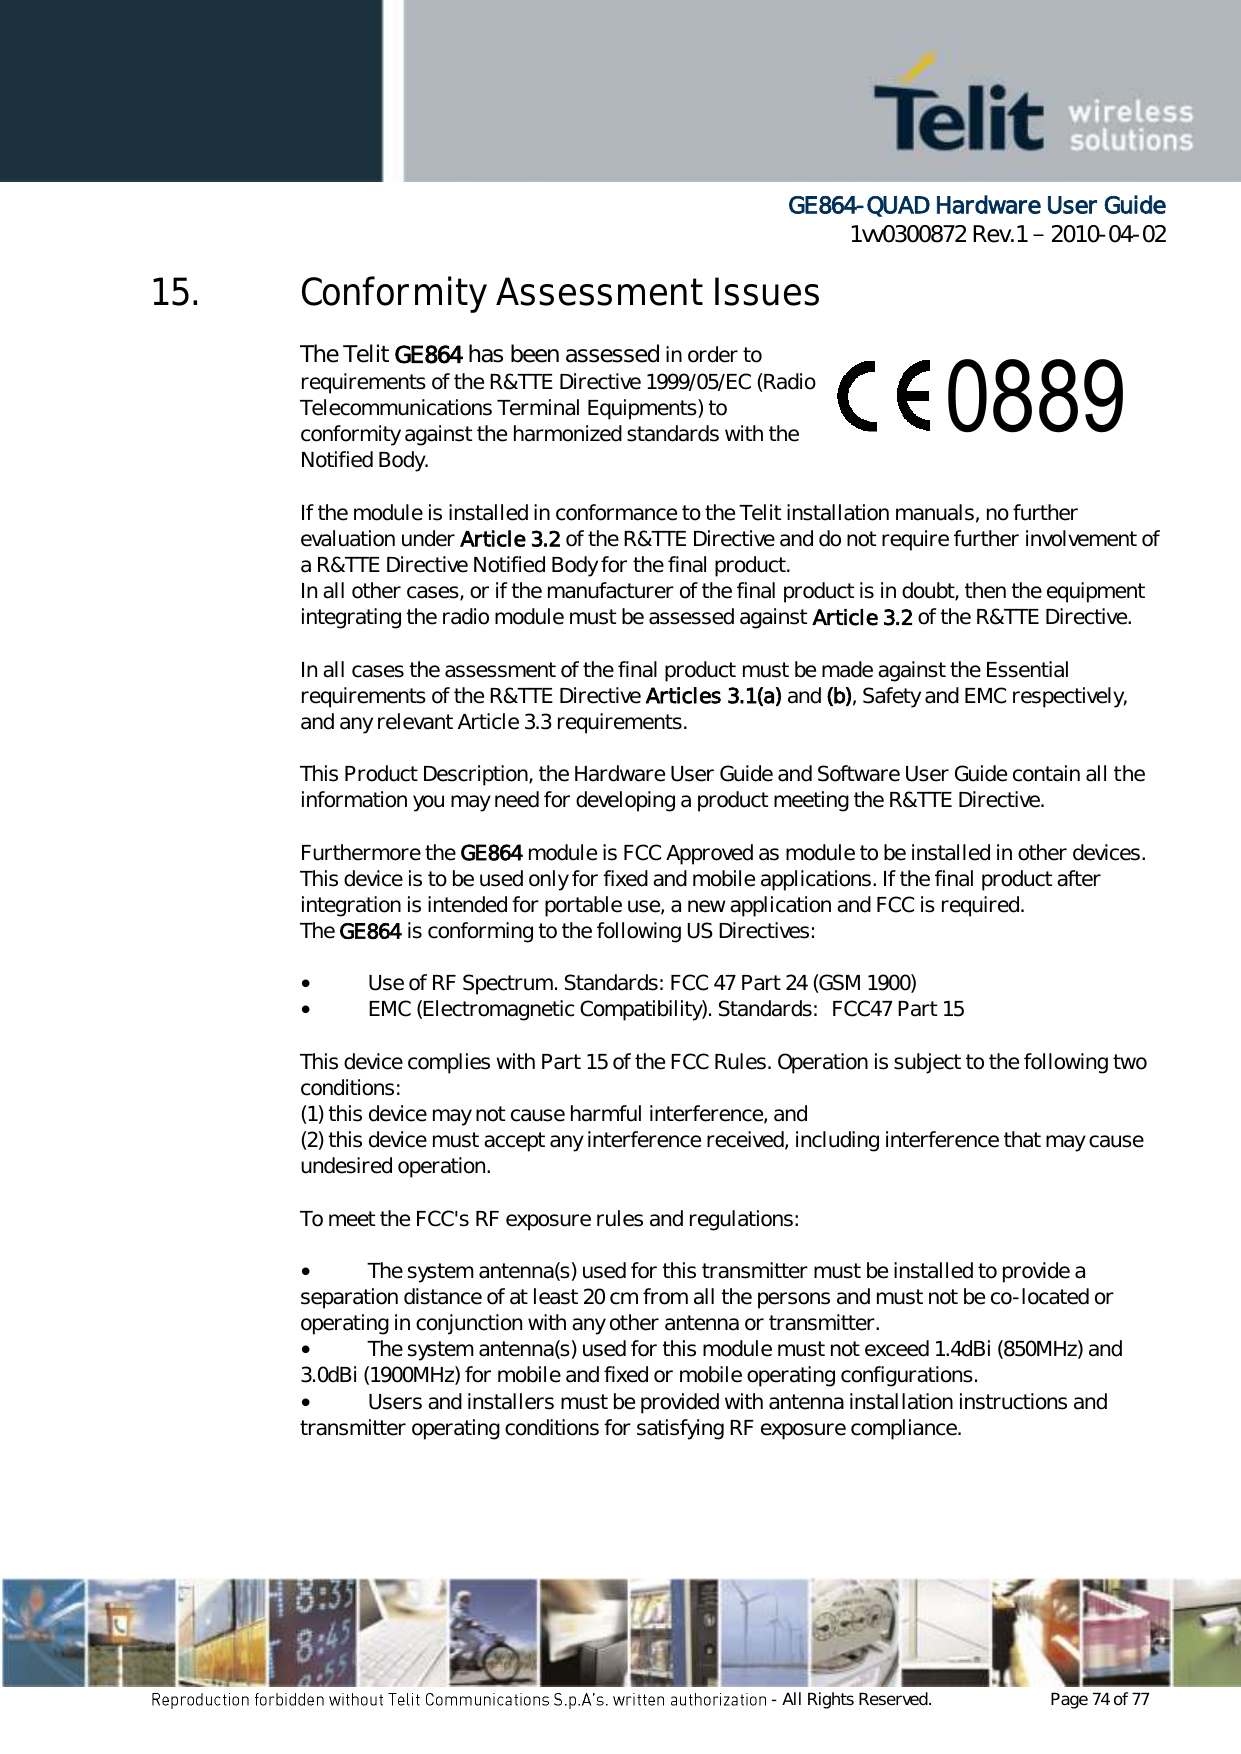      GE864-QUAD Hardware User Guide 1vv0300872 Rev.1   2010-04-02 - All Rights Reserved.    Page 74 of 77  15. Conformity Assessment Issues The Telit GE864 has been assessed in order to  satisfy the essential requirements of the R&amp;TTE Directive 1999/05/EC (Radio  Equipment &amp; Telecommunications Terminal Equipments) to  demonstrate the conformity against the harmonized standards with the  final involvement of a Notified Body.  If the module is installed in conformance to the Telit installation manuals, no further evaluation under Article 3.2 of the R&amp;TTE Directive and do not require further involvement of a R&amp;TTE Directive Notified Body for the final product. In all other cases, or if the manufacturer of the final product is in doubt, then the equipment integrating the radio module must be assessed against Article 3.2 of the R&amp;TTE Directive.  In all cases the assessment of the final product must be made against the Essential requirements of the R&amp;TTE Directive Articles 3.1(a) and (b), Safety and EMC respectively, and any relevant Article 3.3 requirements.  This Product Description, the Hardware User Guide and Software User Guide contain all the information you may need for developing a product meeting the R&amp;TTE Directive.  Furthermore the GE864 module is FCC Approved as module to be installed in other devices. This device is to be used only for fixed and mobile applications. If the final product after integration is intended for portable use, a new application and FCC is required. The GE864 is conforming to the following US Directives:  •        Use of RF Spectrum. Standards: FCC 47 Part 24 (GSM 1900) •        EMC (Electromagnetic Compatibility). Standards:  FCC47 Part 15  This device complies with Part 15 of the FCC Rules. Operation is subject to the following two conditions: (1) this device may not cause harmful interference, and (2) this device must accept any interference received, including interference that may cause undesired operation.  To meet the FCC&apos;s RF exposure rules and regulations:  •        The system antenna(s) used for this transmitter must be installed to provide a separation distance of at least 20 cm from all the persons and must not be co-located or operating in conjunction with any other antenna or transmitter. •        The system antenna(s) used for this module must not exceed 1.4dBi (850MHz) and 3.0dBi (1900MHz) for mobile and fixed or mobile operating configurations. •        Users and installers must be provided with antenna installation instructions and transmitter operating conditions for satisfying RF exposure compliance.  0889 